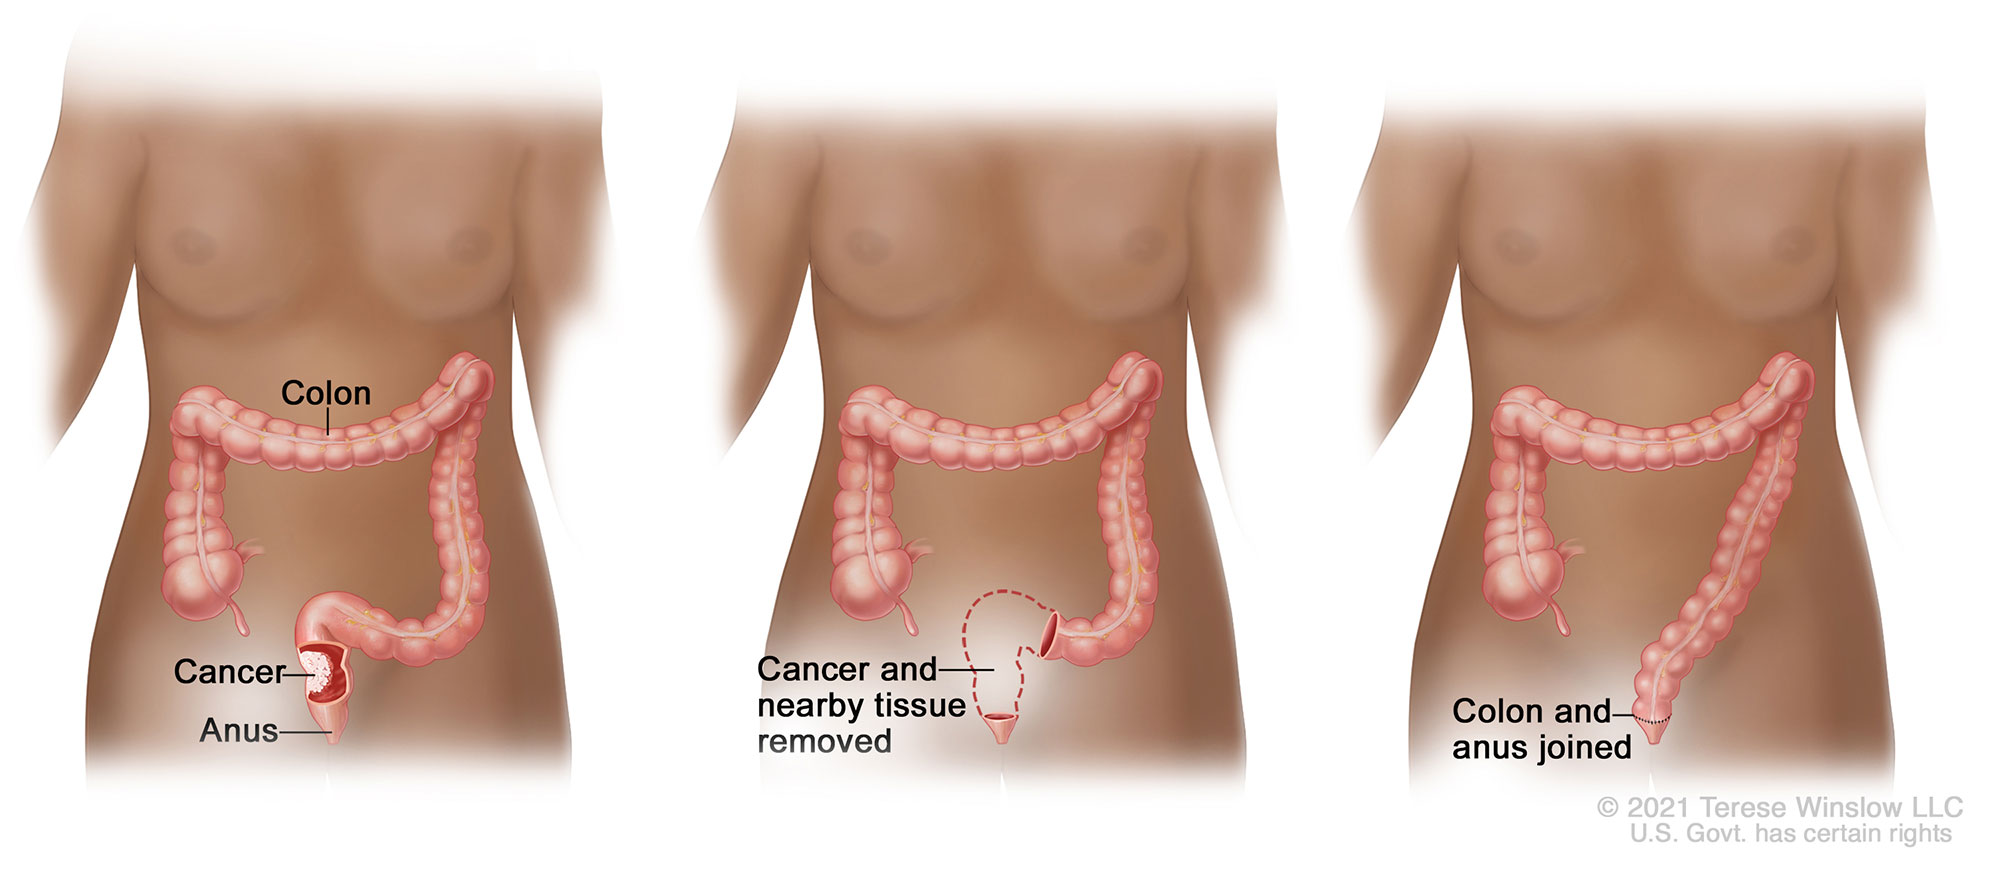 An illustration of the colon within the human body and identifying where the cancer may be located and then removed.